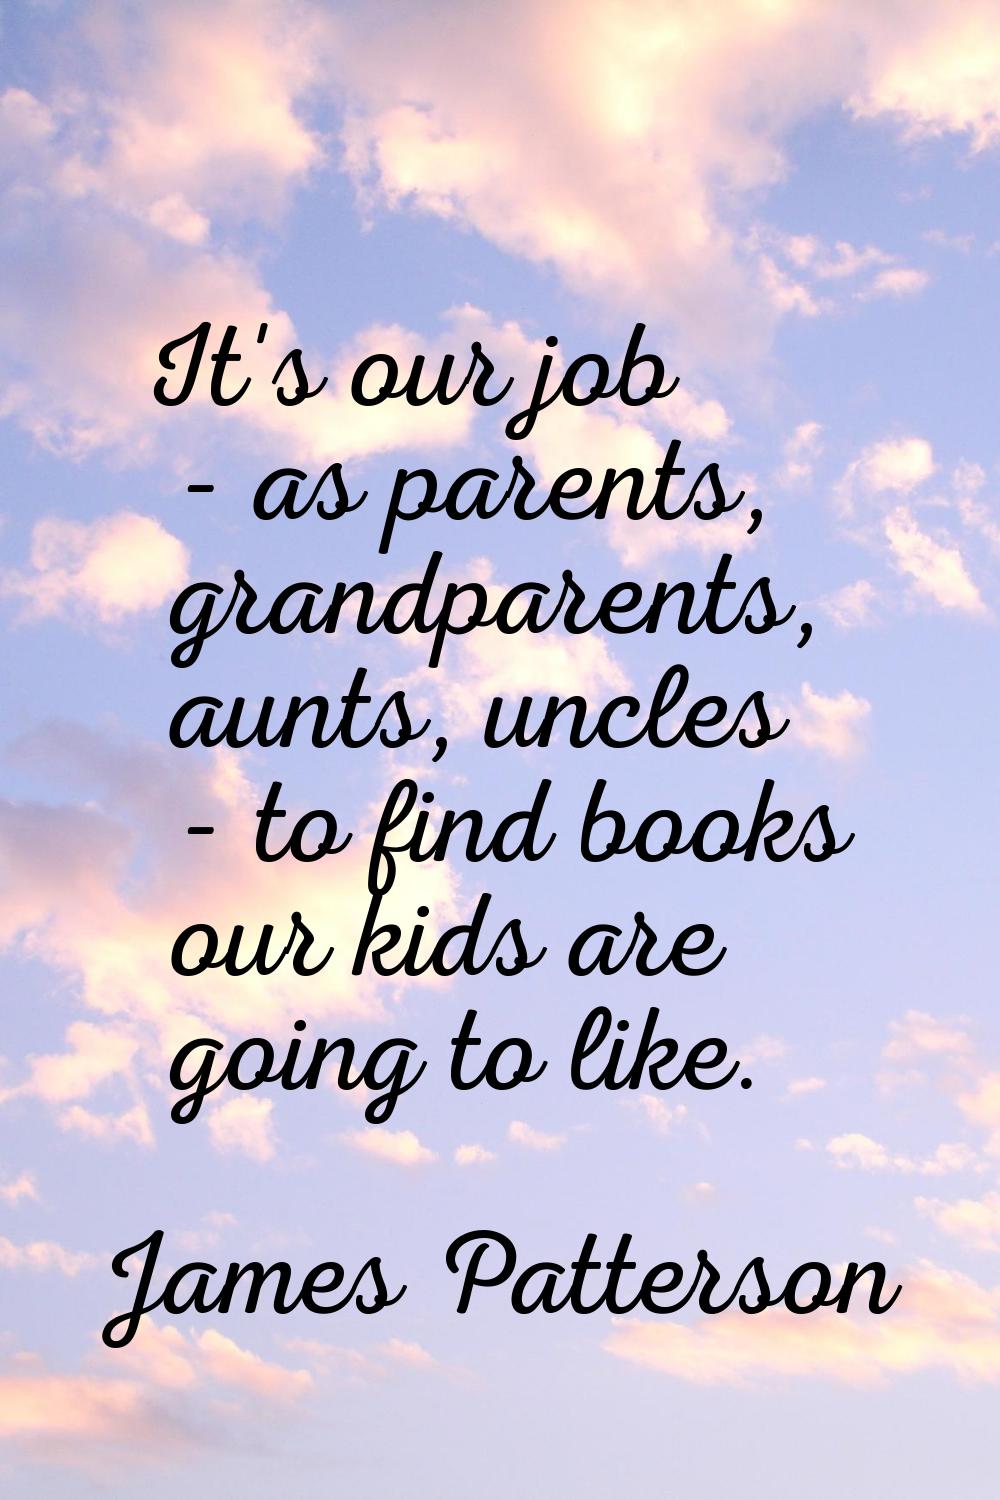 It's our job - as parents, grandparents, aunts, uncles - to find books our kids are going to like.